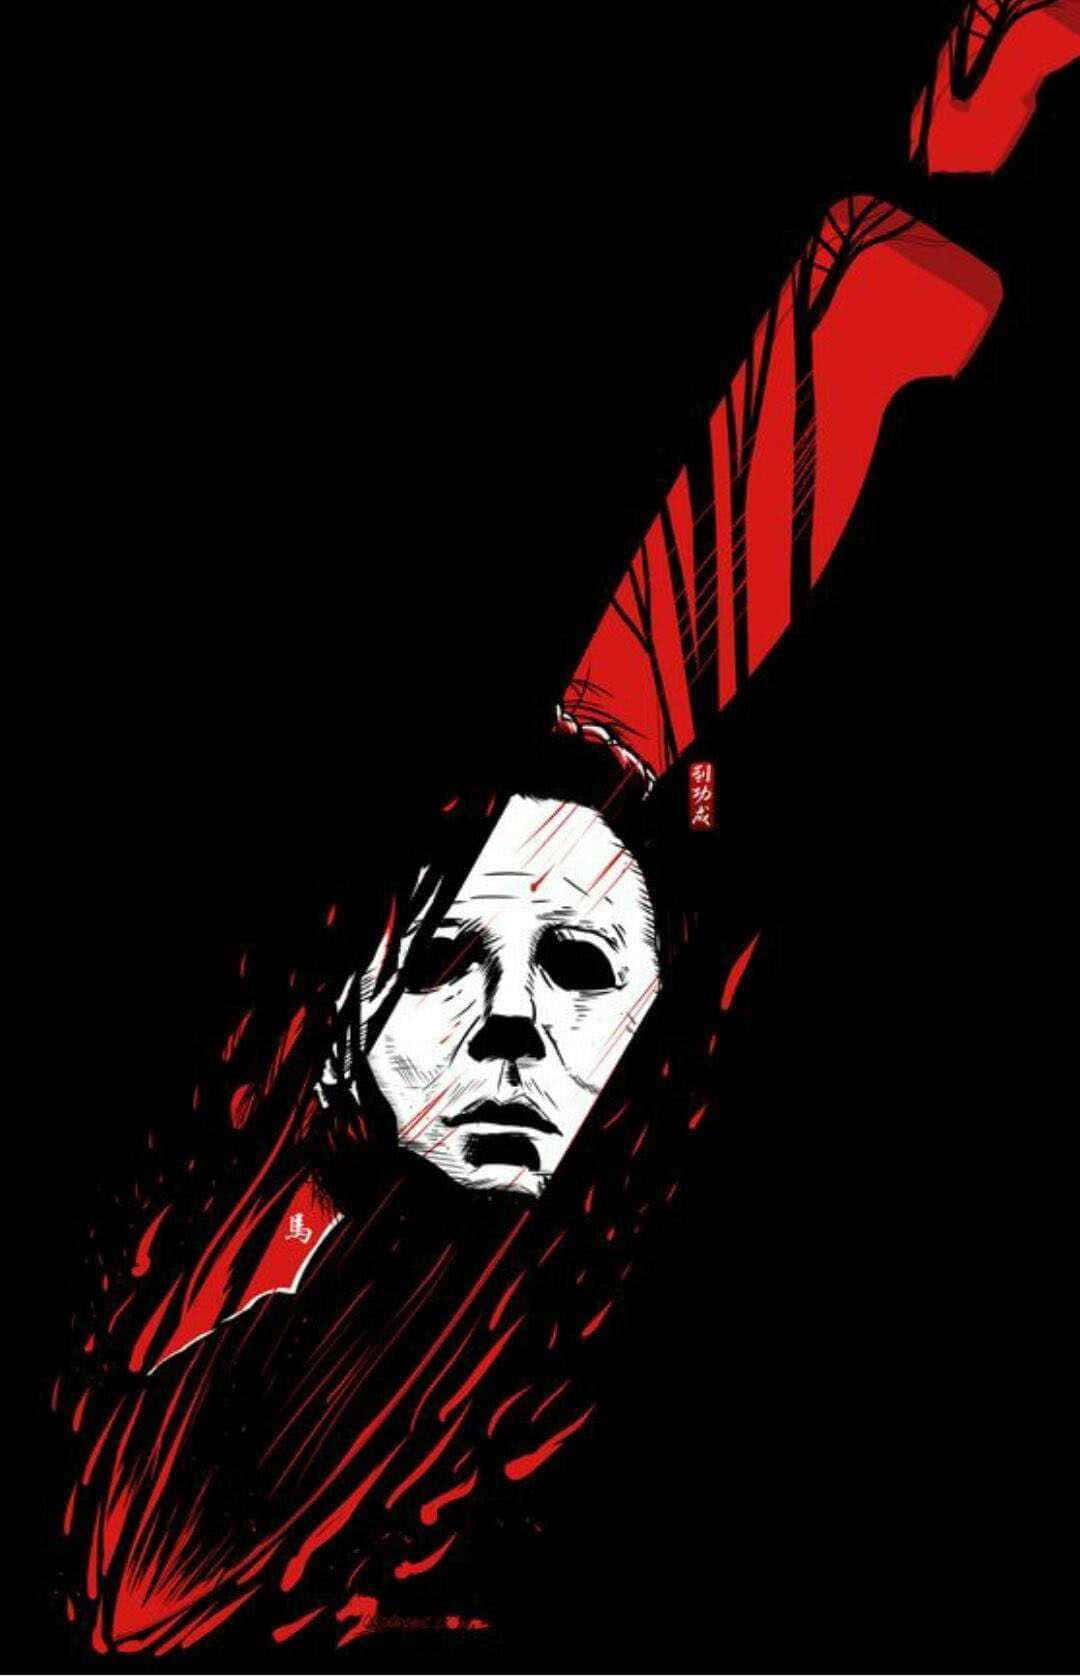 The embodiment of terror and dread, Michael Myers.